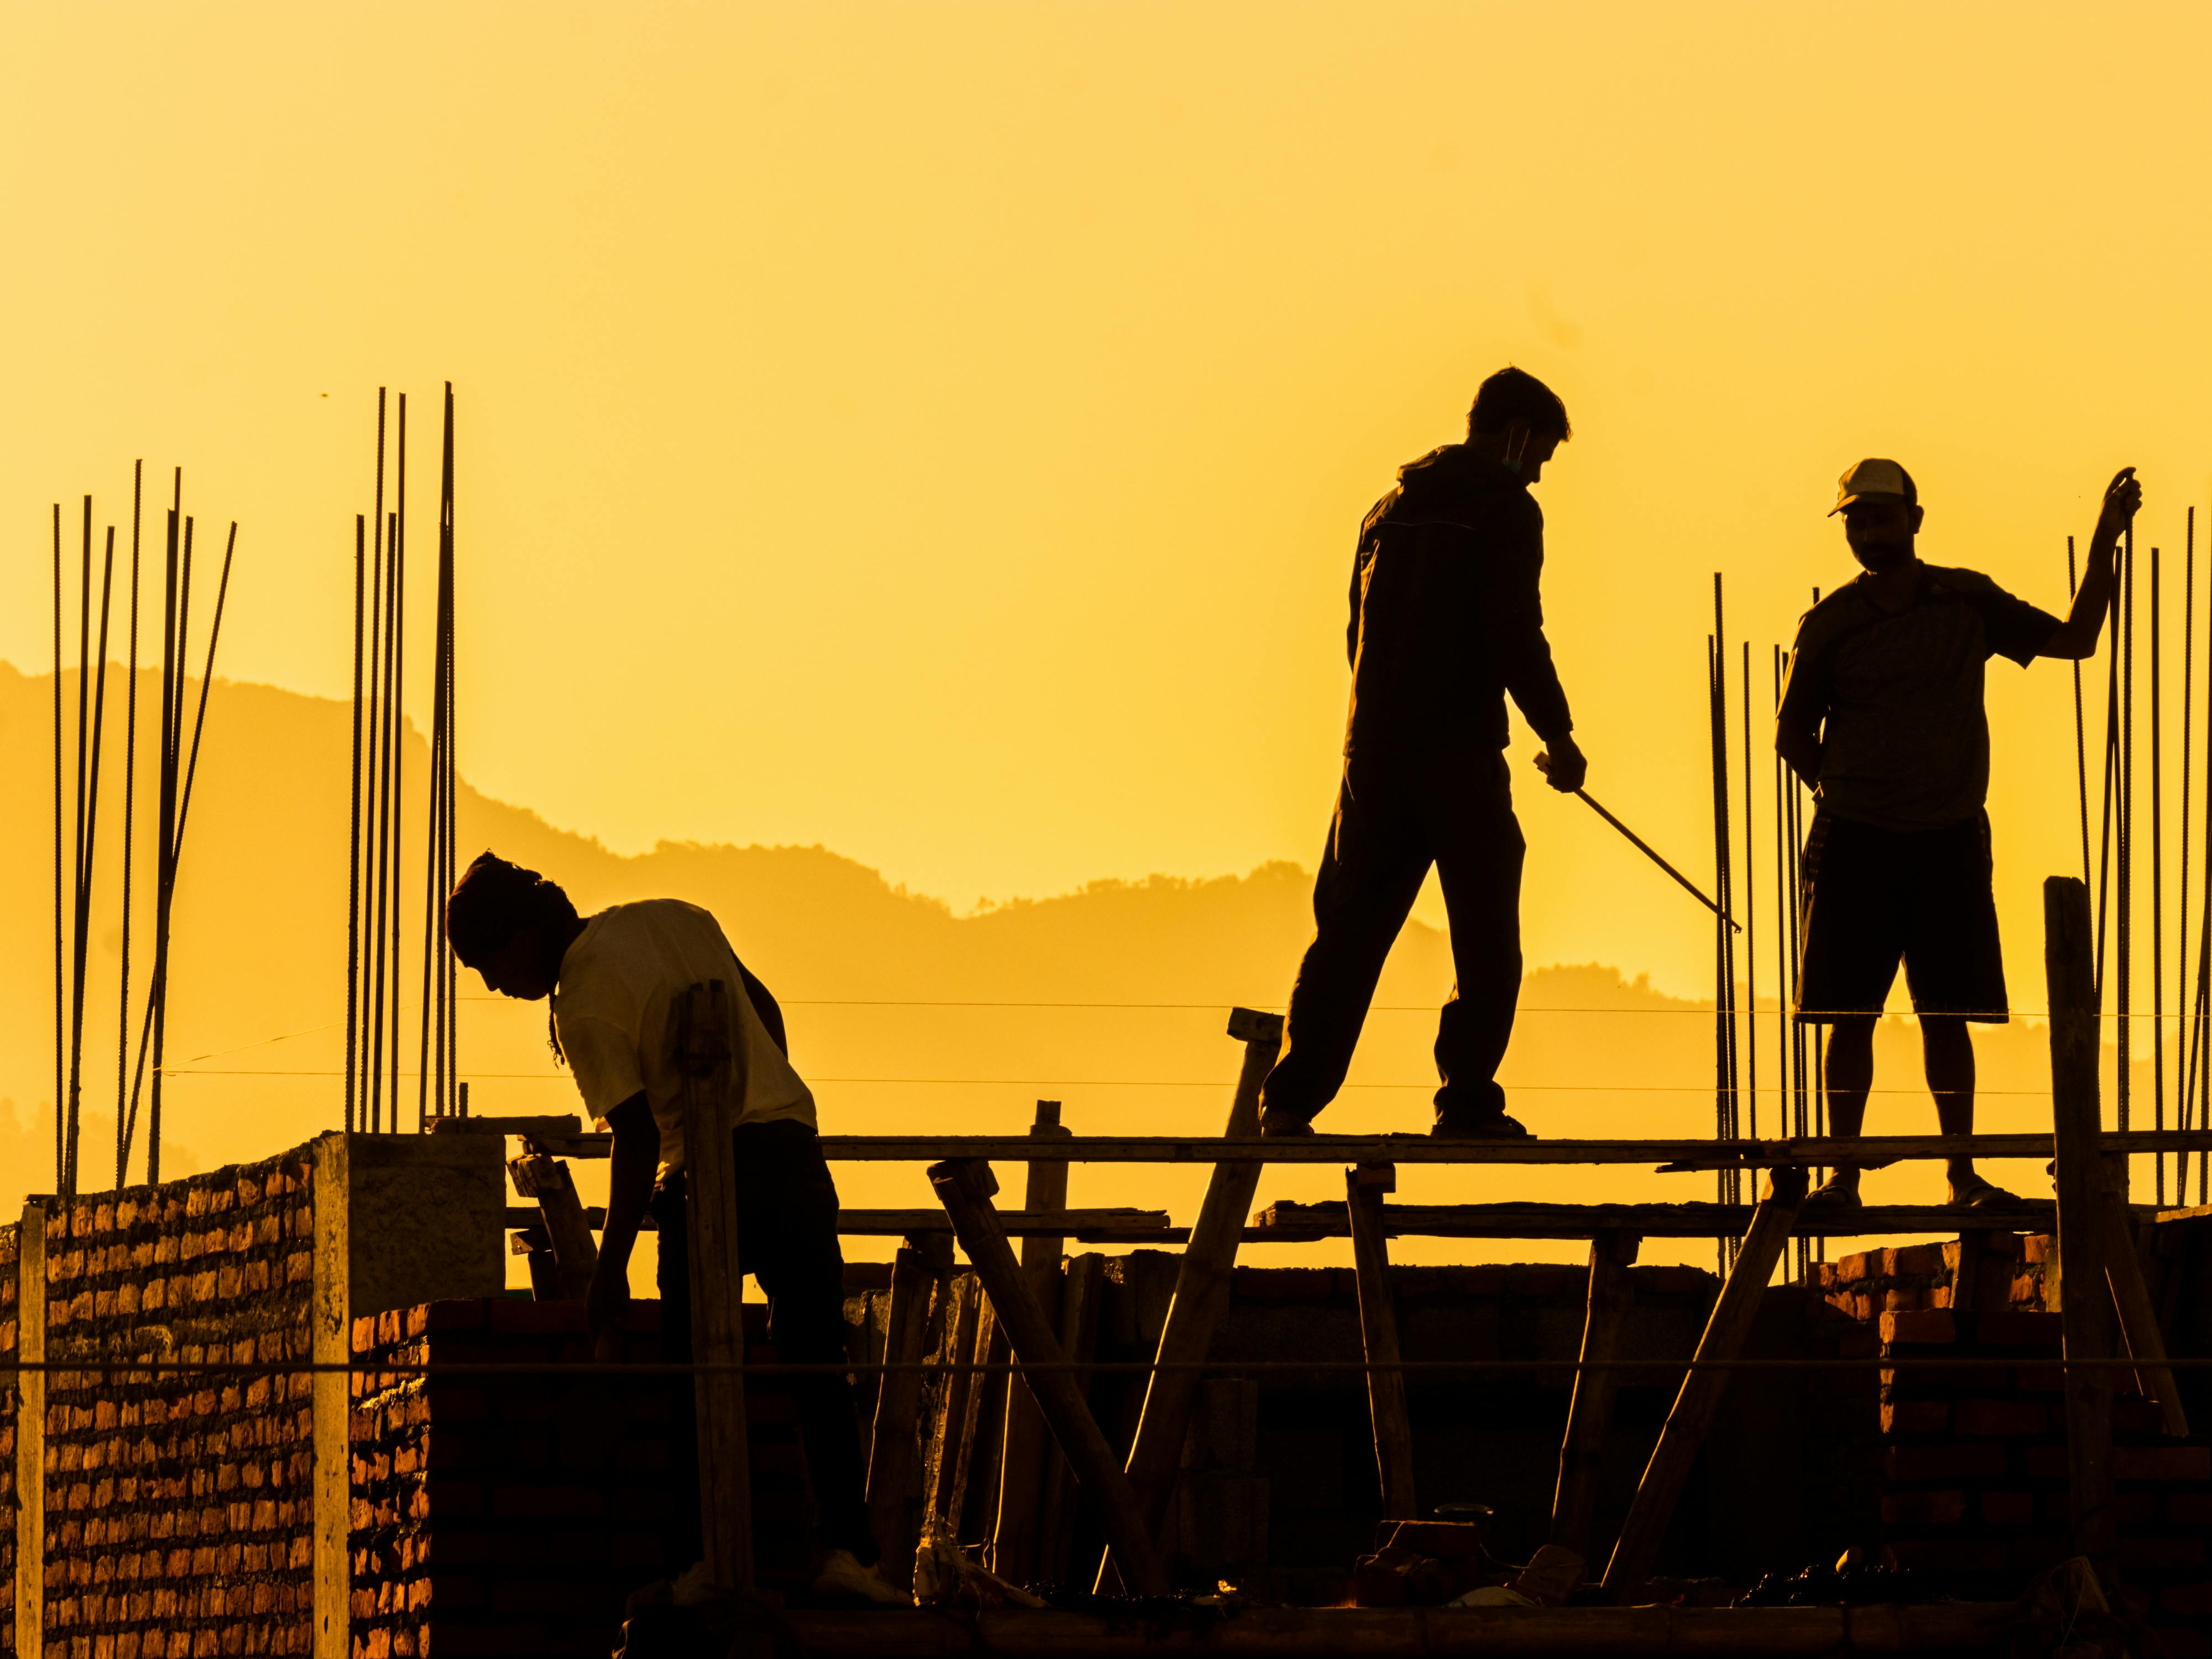 construction worker silhouette